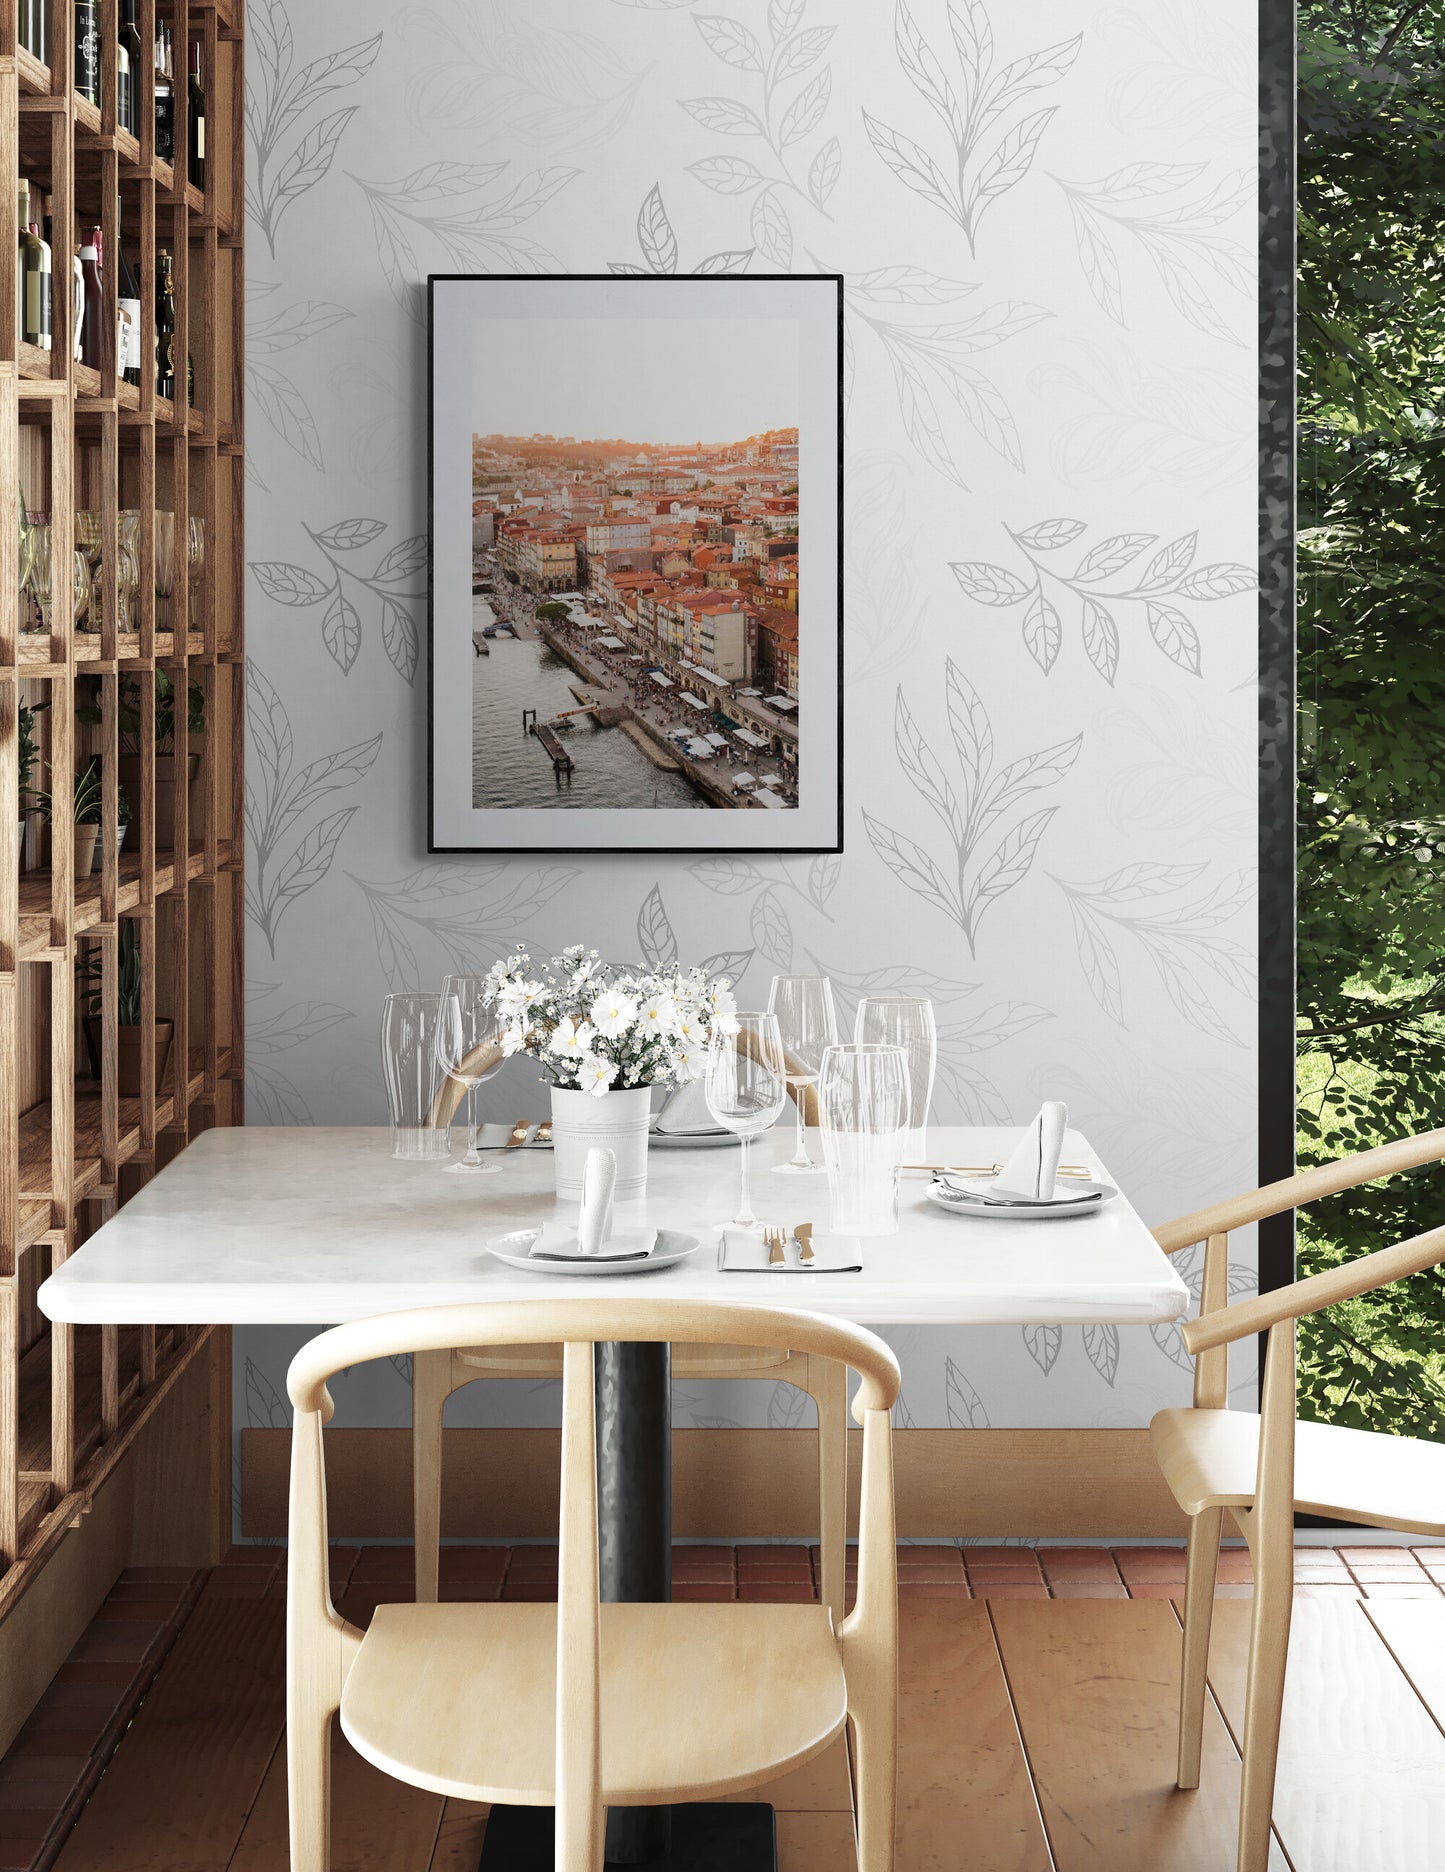 Photograph of Porto Portugal at Sunset in Dining Room as Wall Art